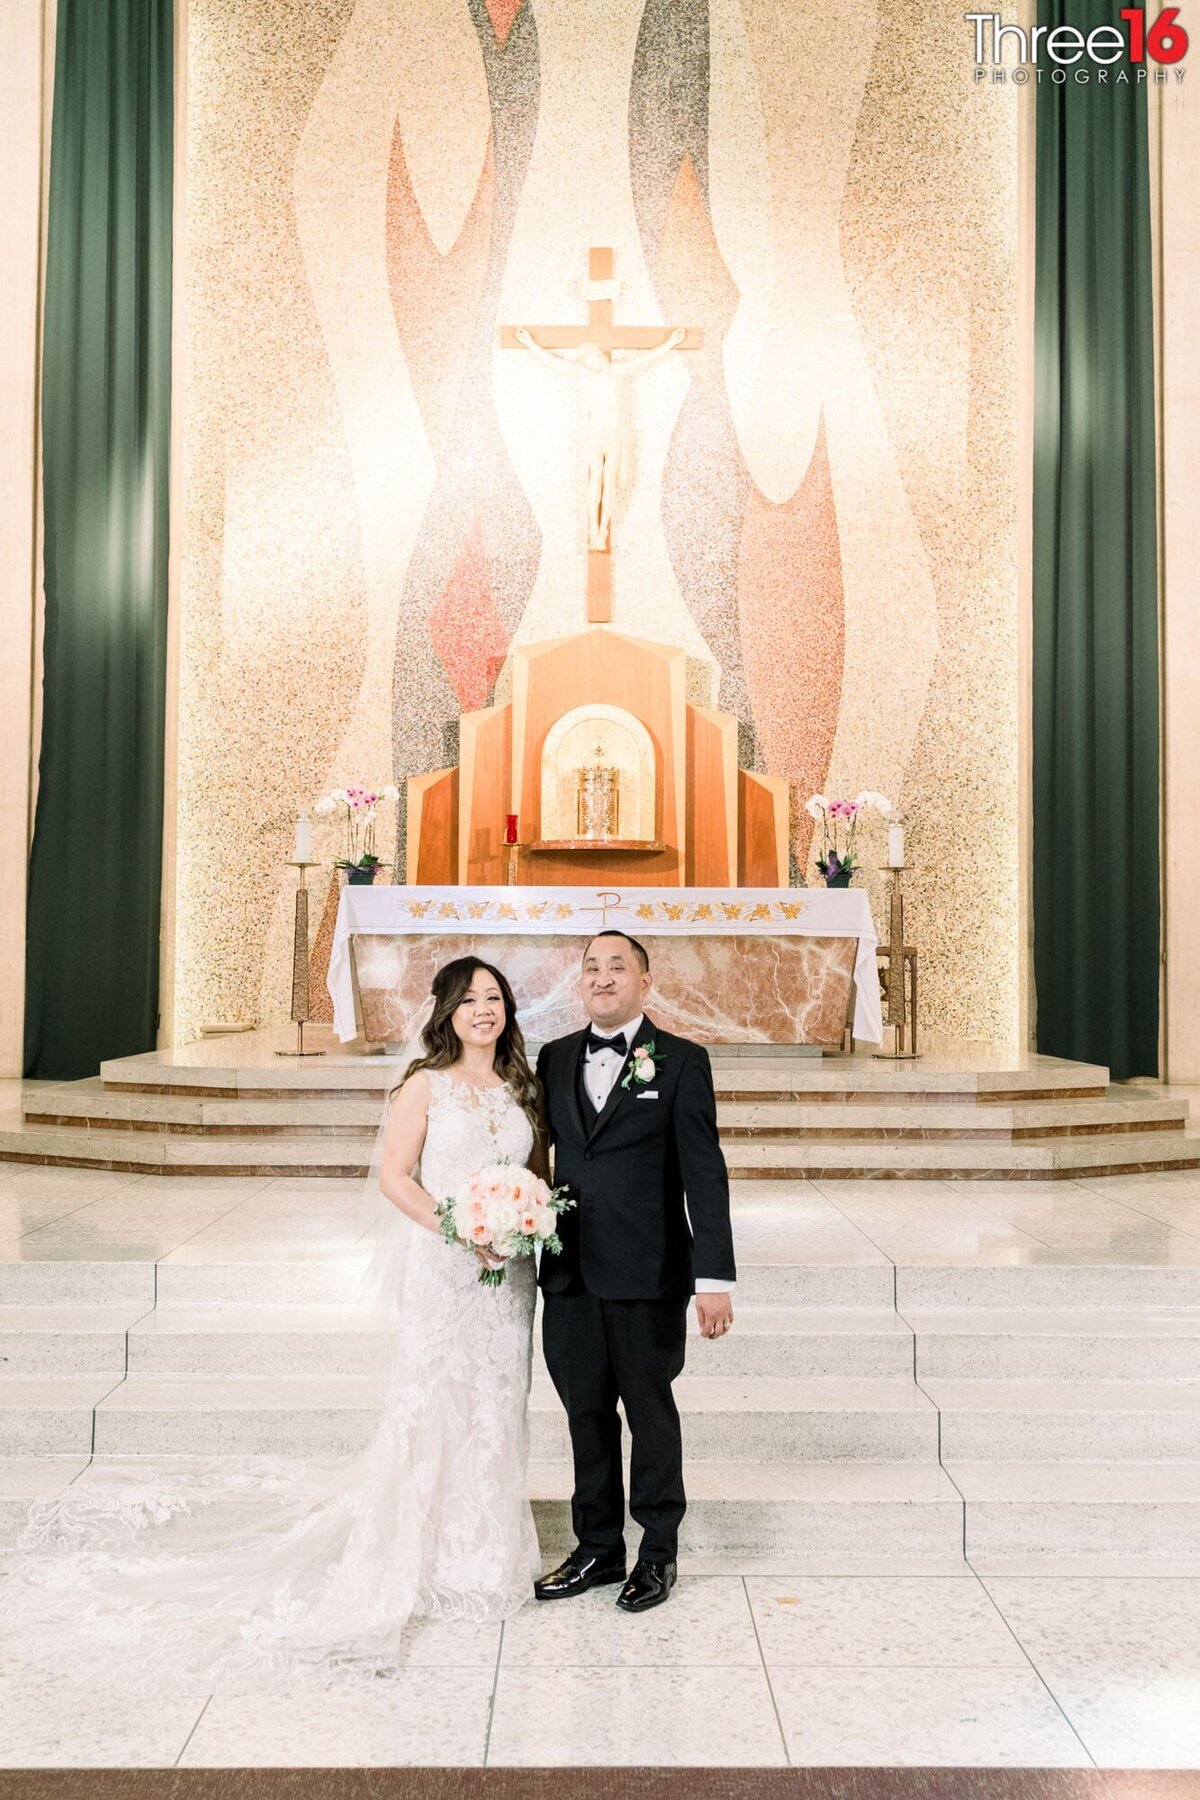 Bride and Groom pose for the wedding photographer in front of the altar inside the church